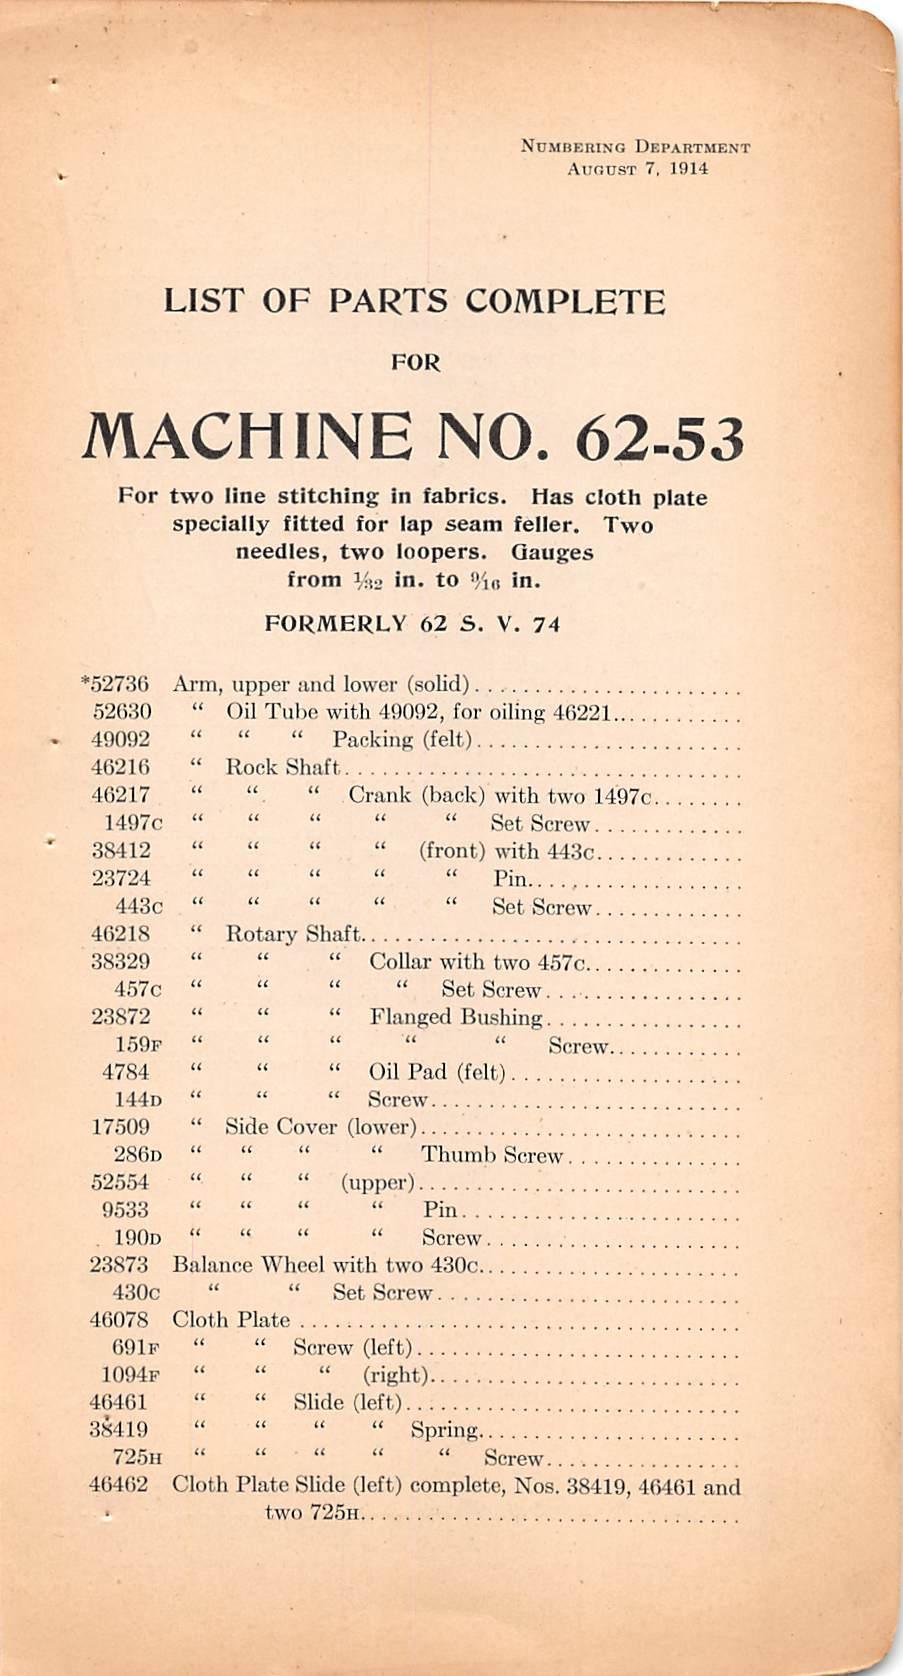 NnMBERiNO Department AunosT 7, 1914 LIST OF PARTS COMPLETE FOR MACHINE NO. 62-53 For two line stitching in fabrics. Has cloth plate specially fitted for lap seam feller. Two needles, two loopers.